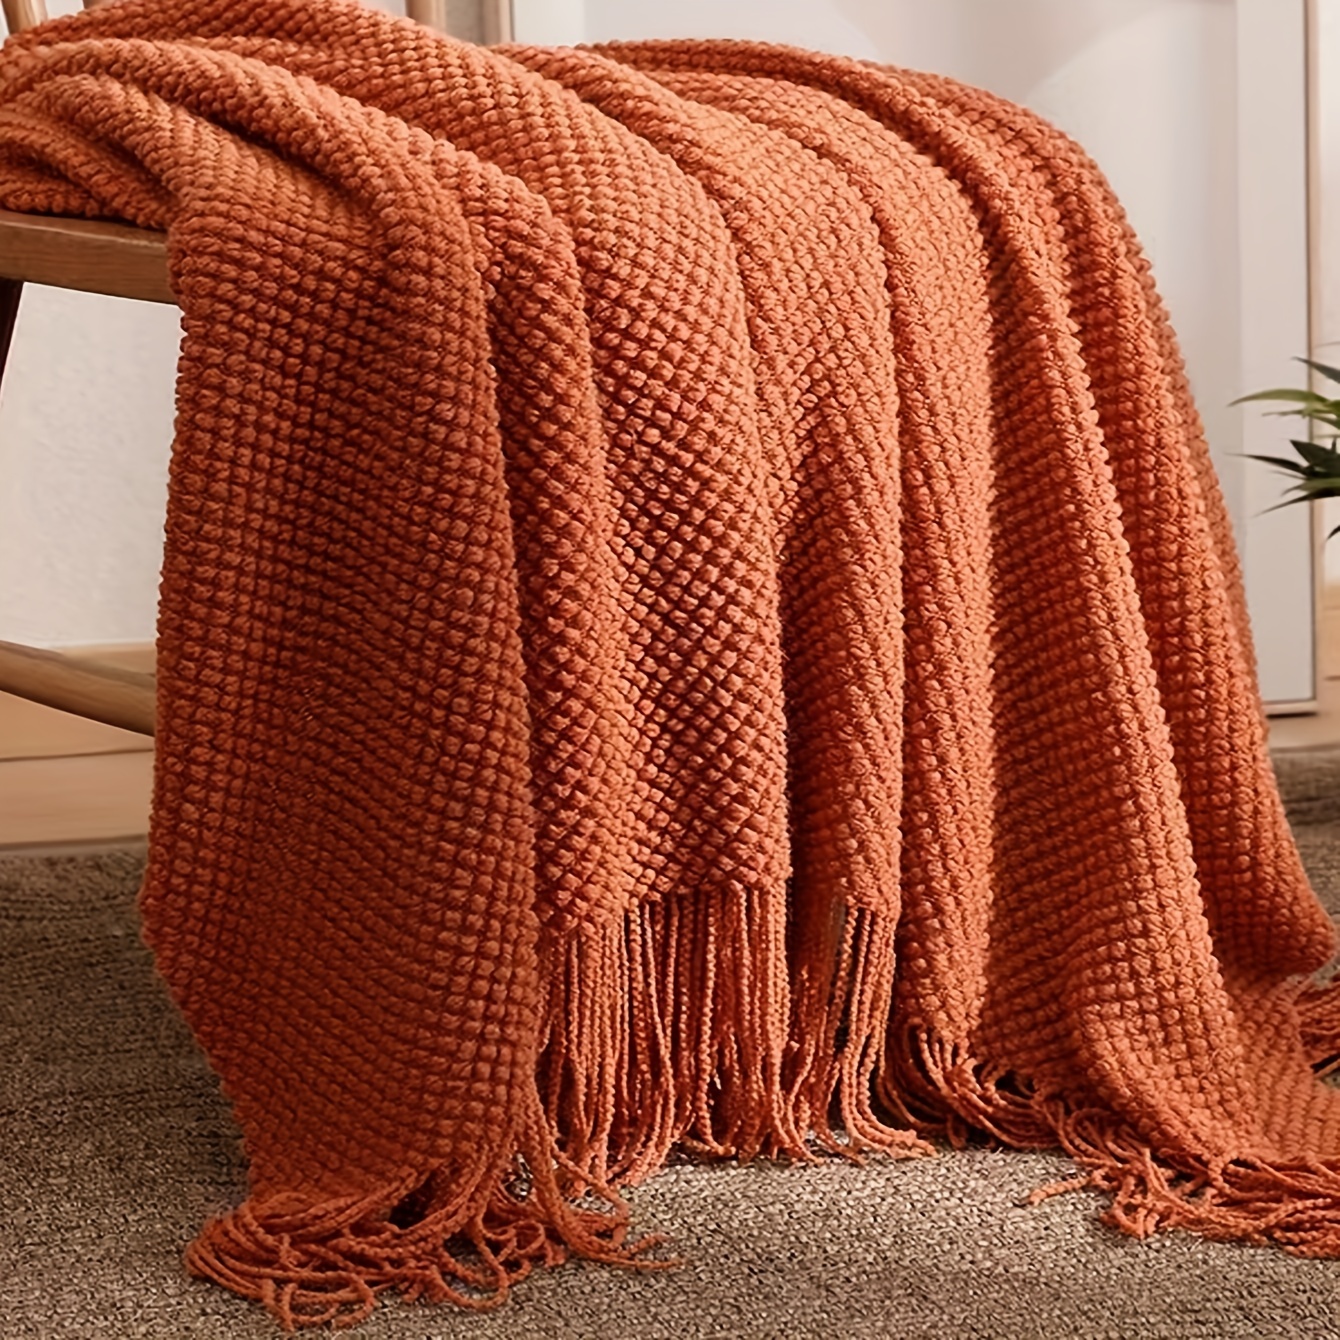 

1pc Morandi Orange Tassel Knitted Blanket, Soft Warm Throw Blanket Nap Blanket For Couch Sofa Office Bed Camping Travelling